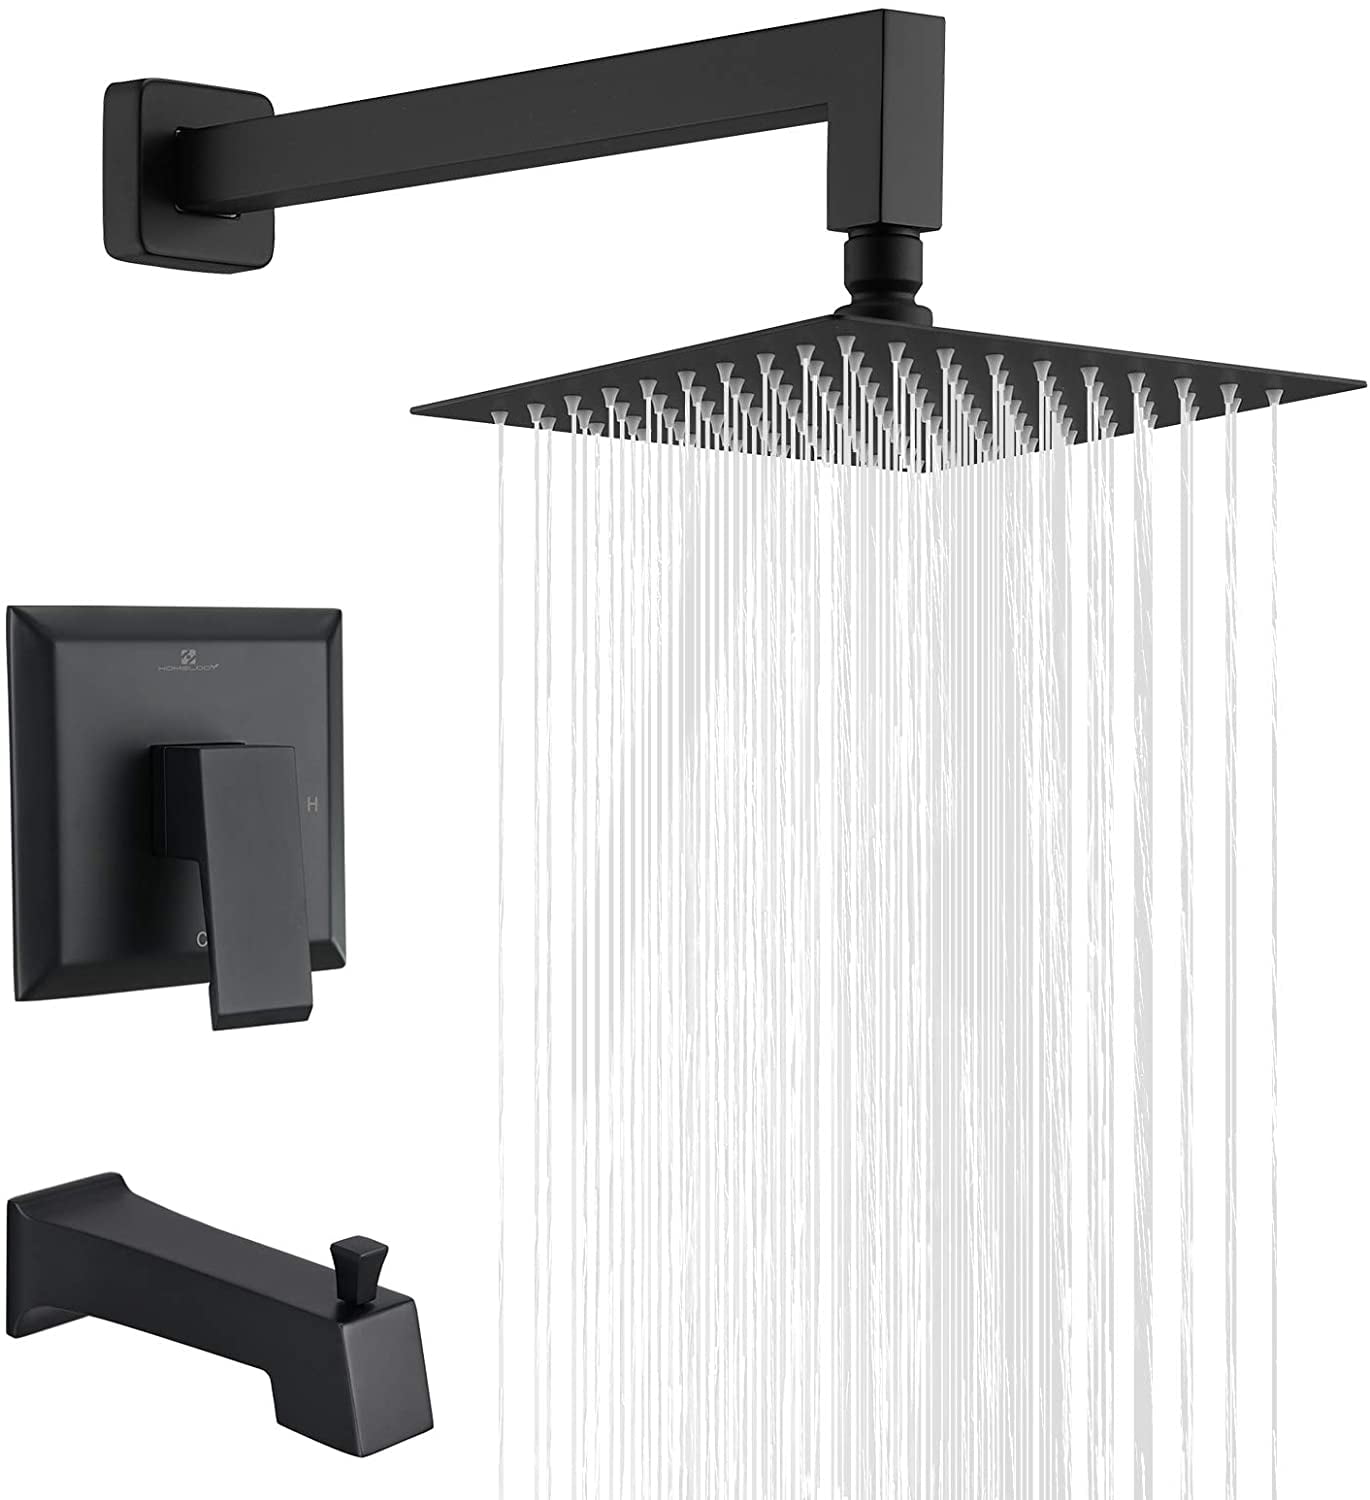 Rough in Valve Include） Shower Faucet Set with Valve and 12 Rain Shower Head Systems Wall Mounted Shower Combo Set for Bathroom All Metal Esnbia Brushed Nickel Shower System